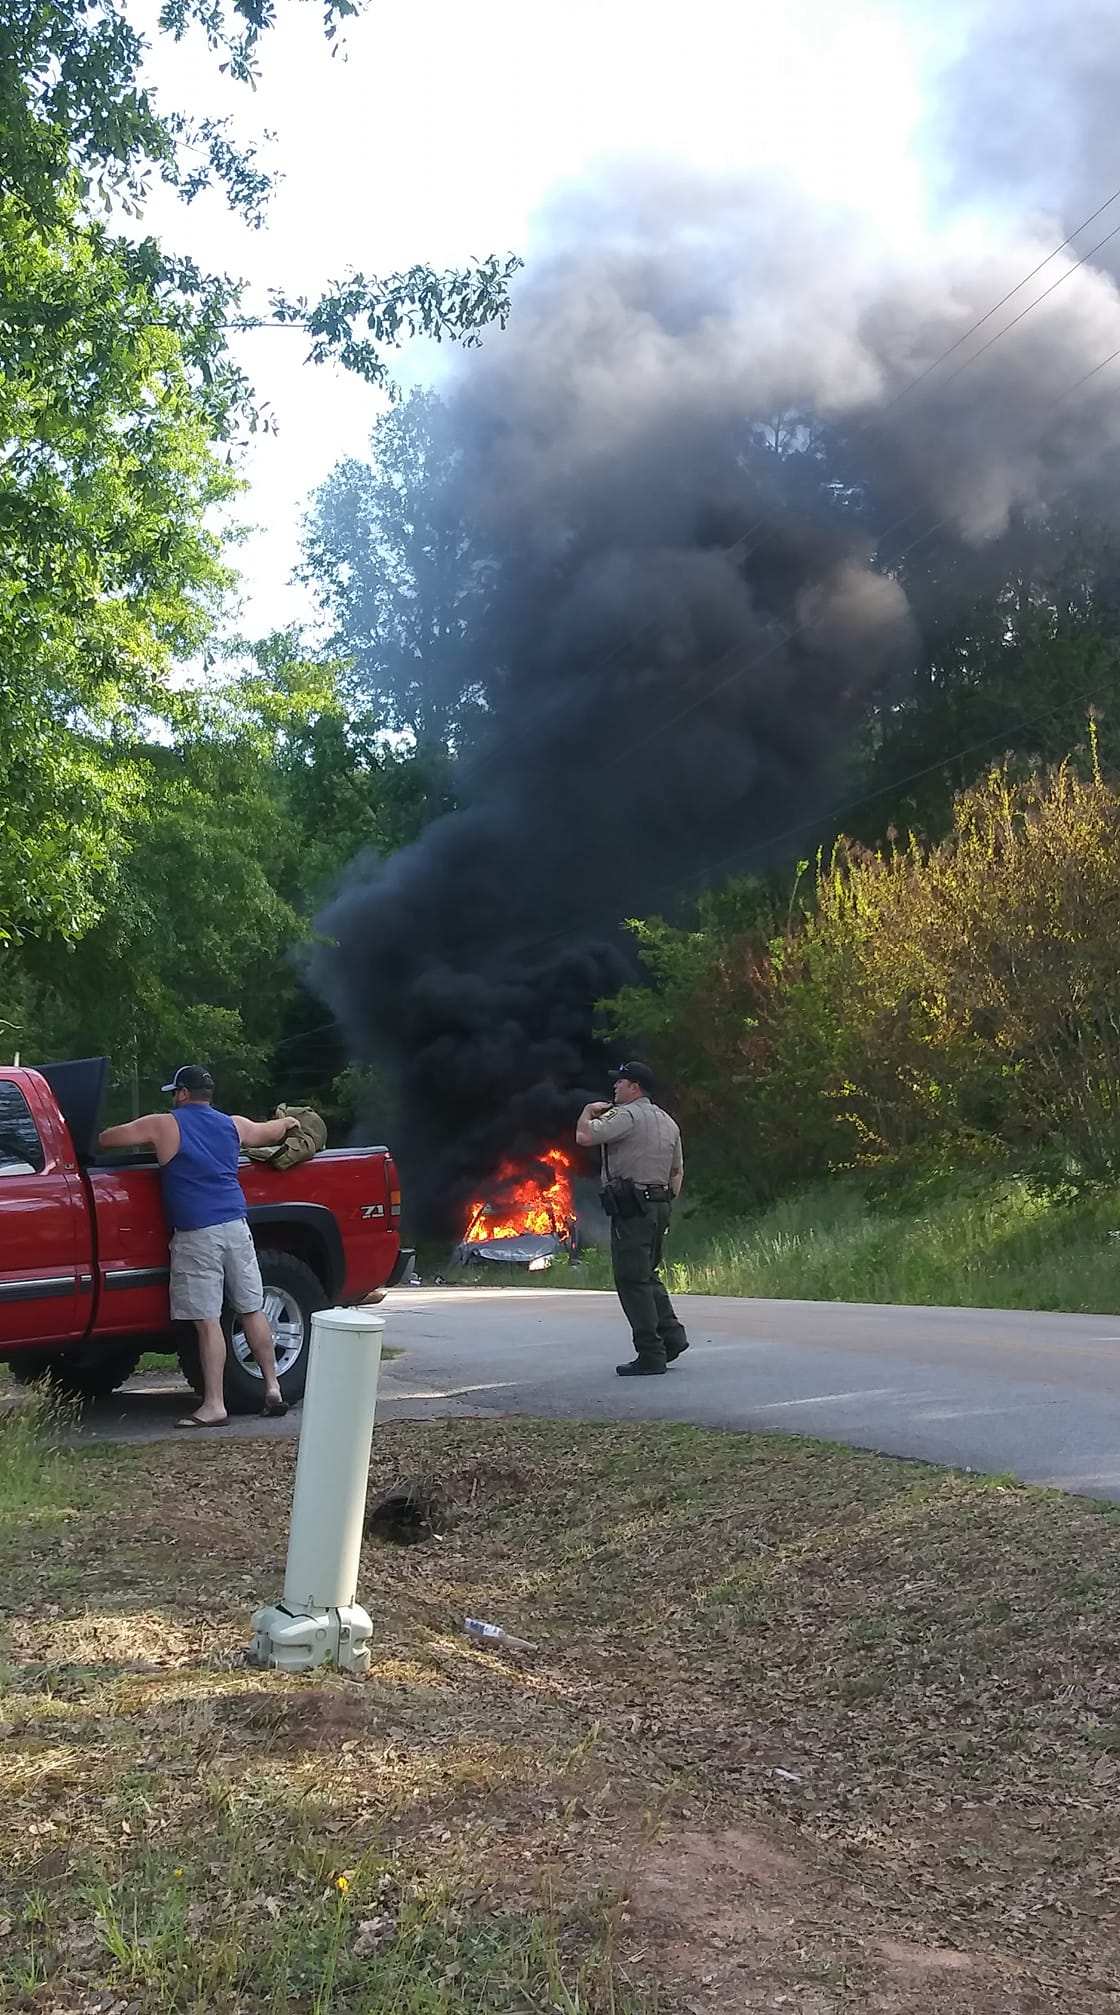 Video: Driver catches fire after hoarded gas in vehicle explodes during chase, SC cops say